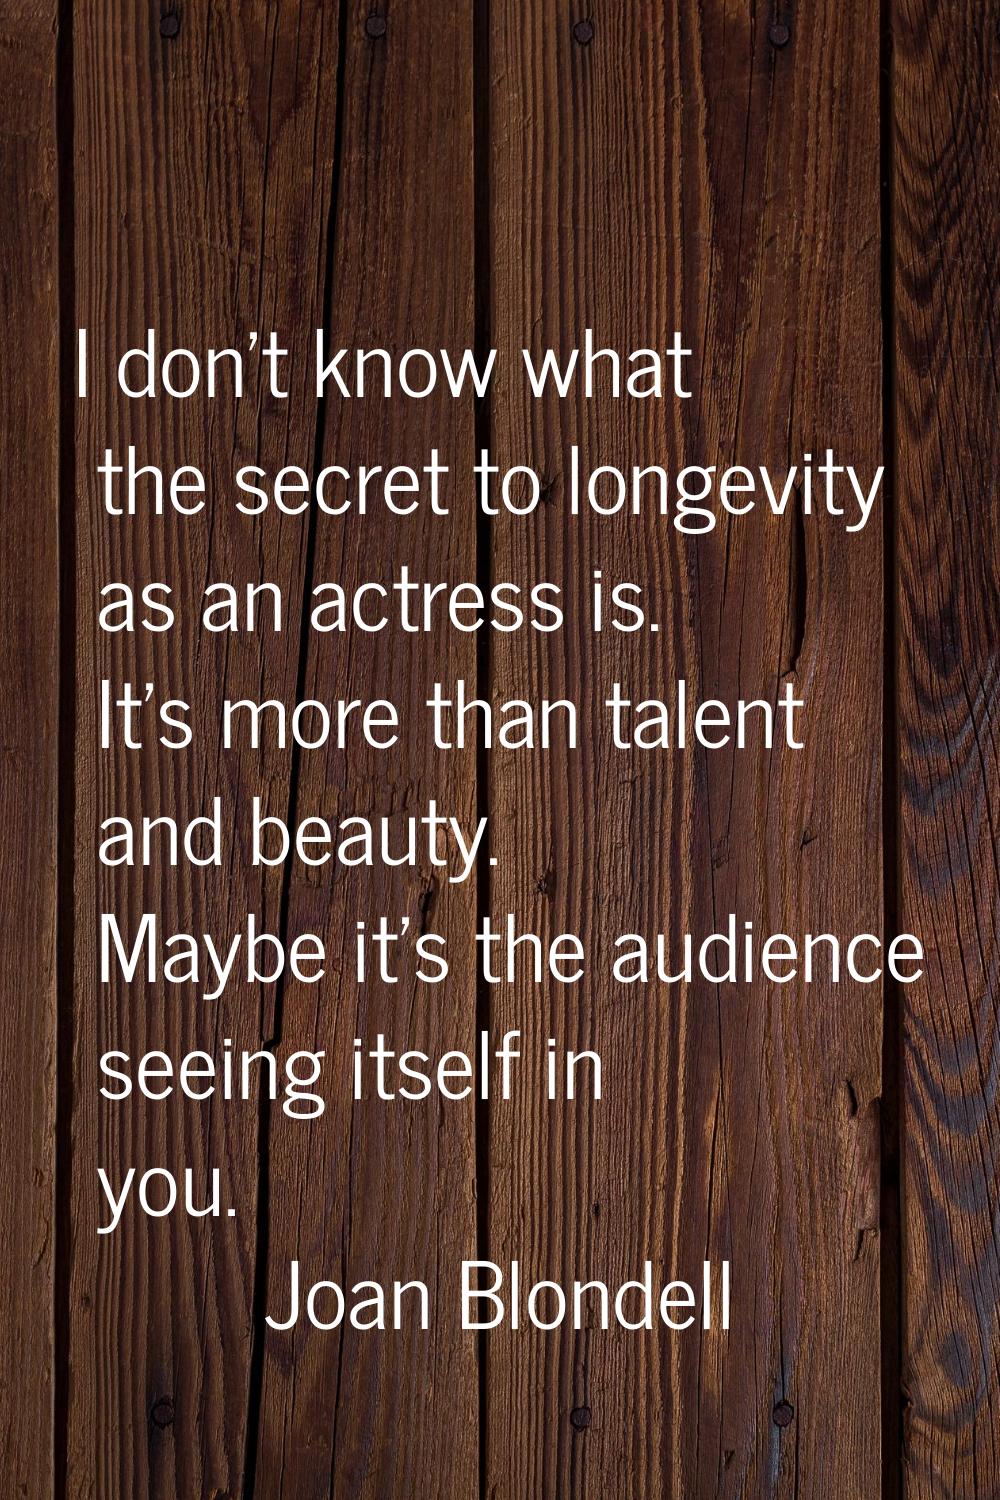 I don't know what the secret to longevity as an actress is. It's more than talent and beauty. Maybe